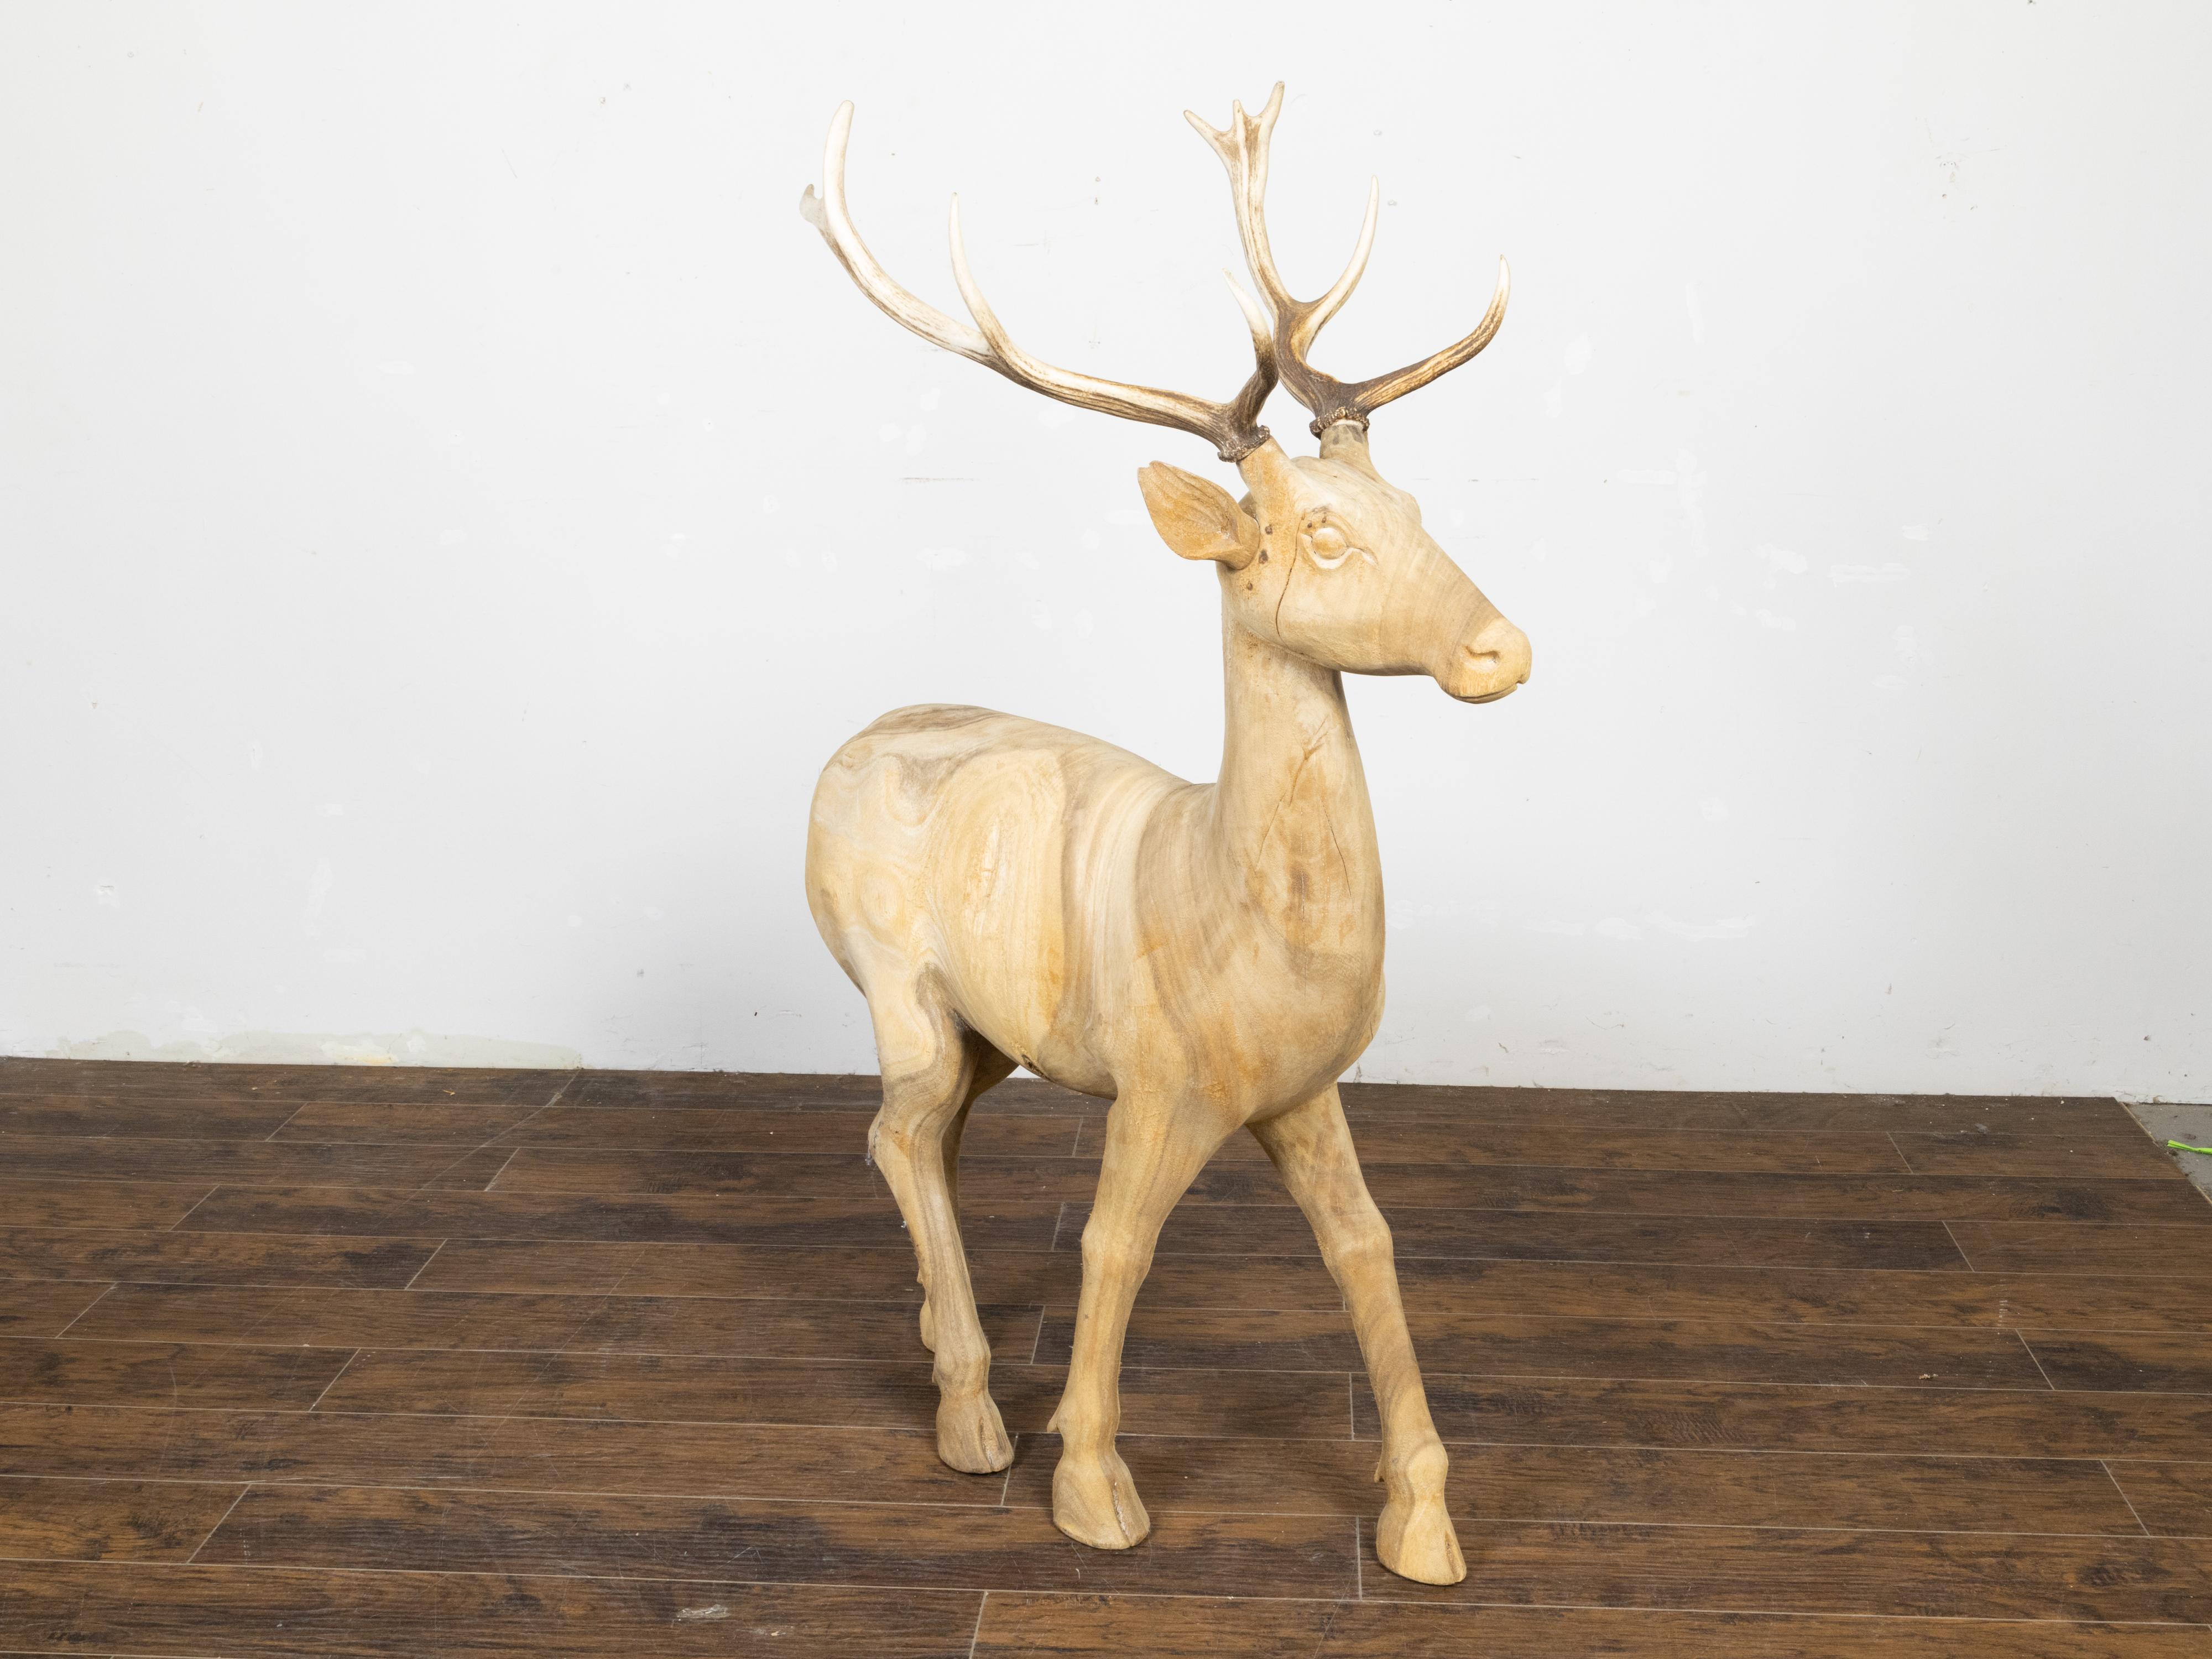 Vintage Midcentury Sculpture of a Walking Stag with Antlers and Natural Patina For Sale 1